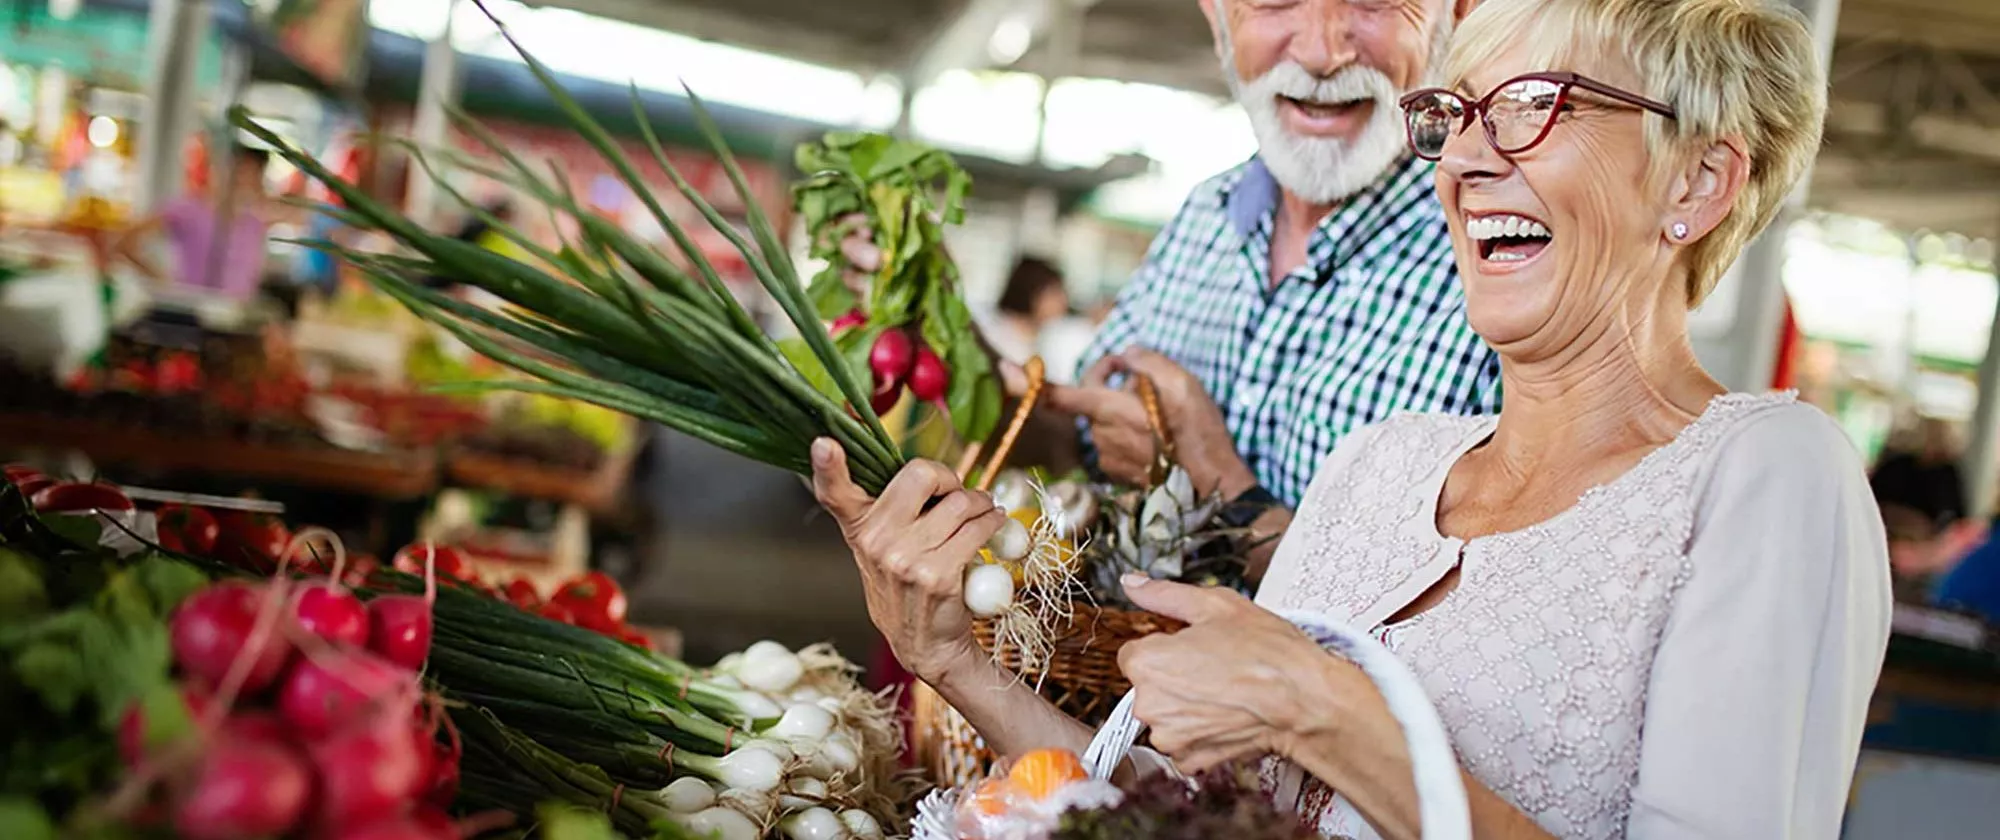 Middle aged man and woman buying onion and radish at store, laughing with each other